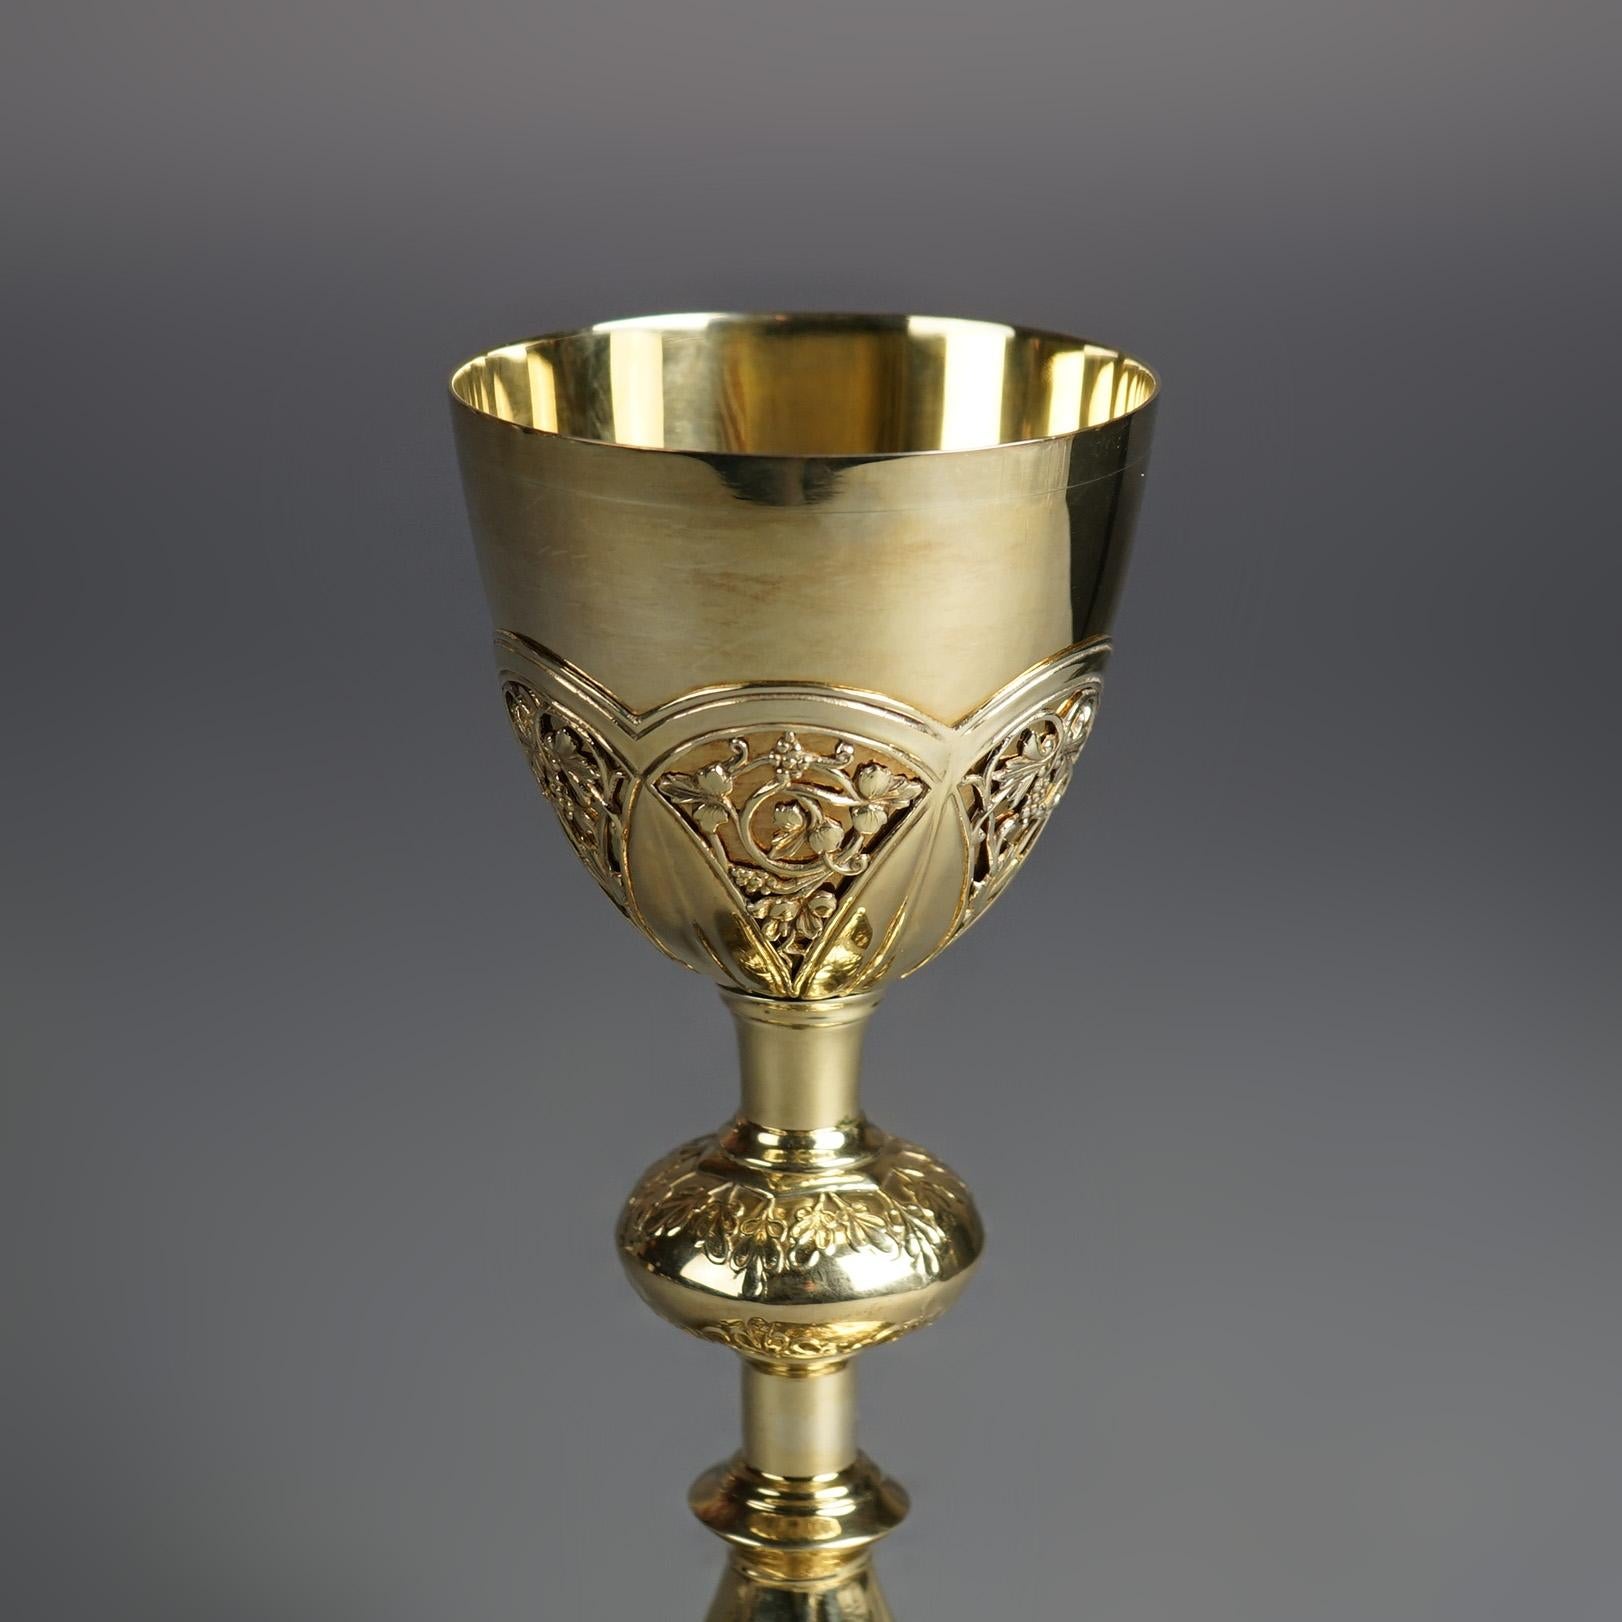 Gold Wash Floral Engraved Silver Religious Offering Chalice with Hallmark & Case For Sale 4